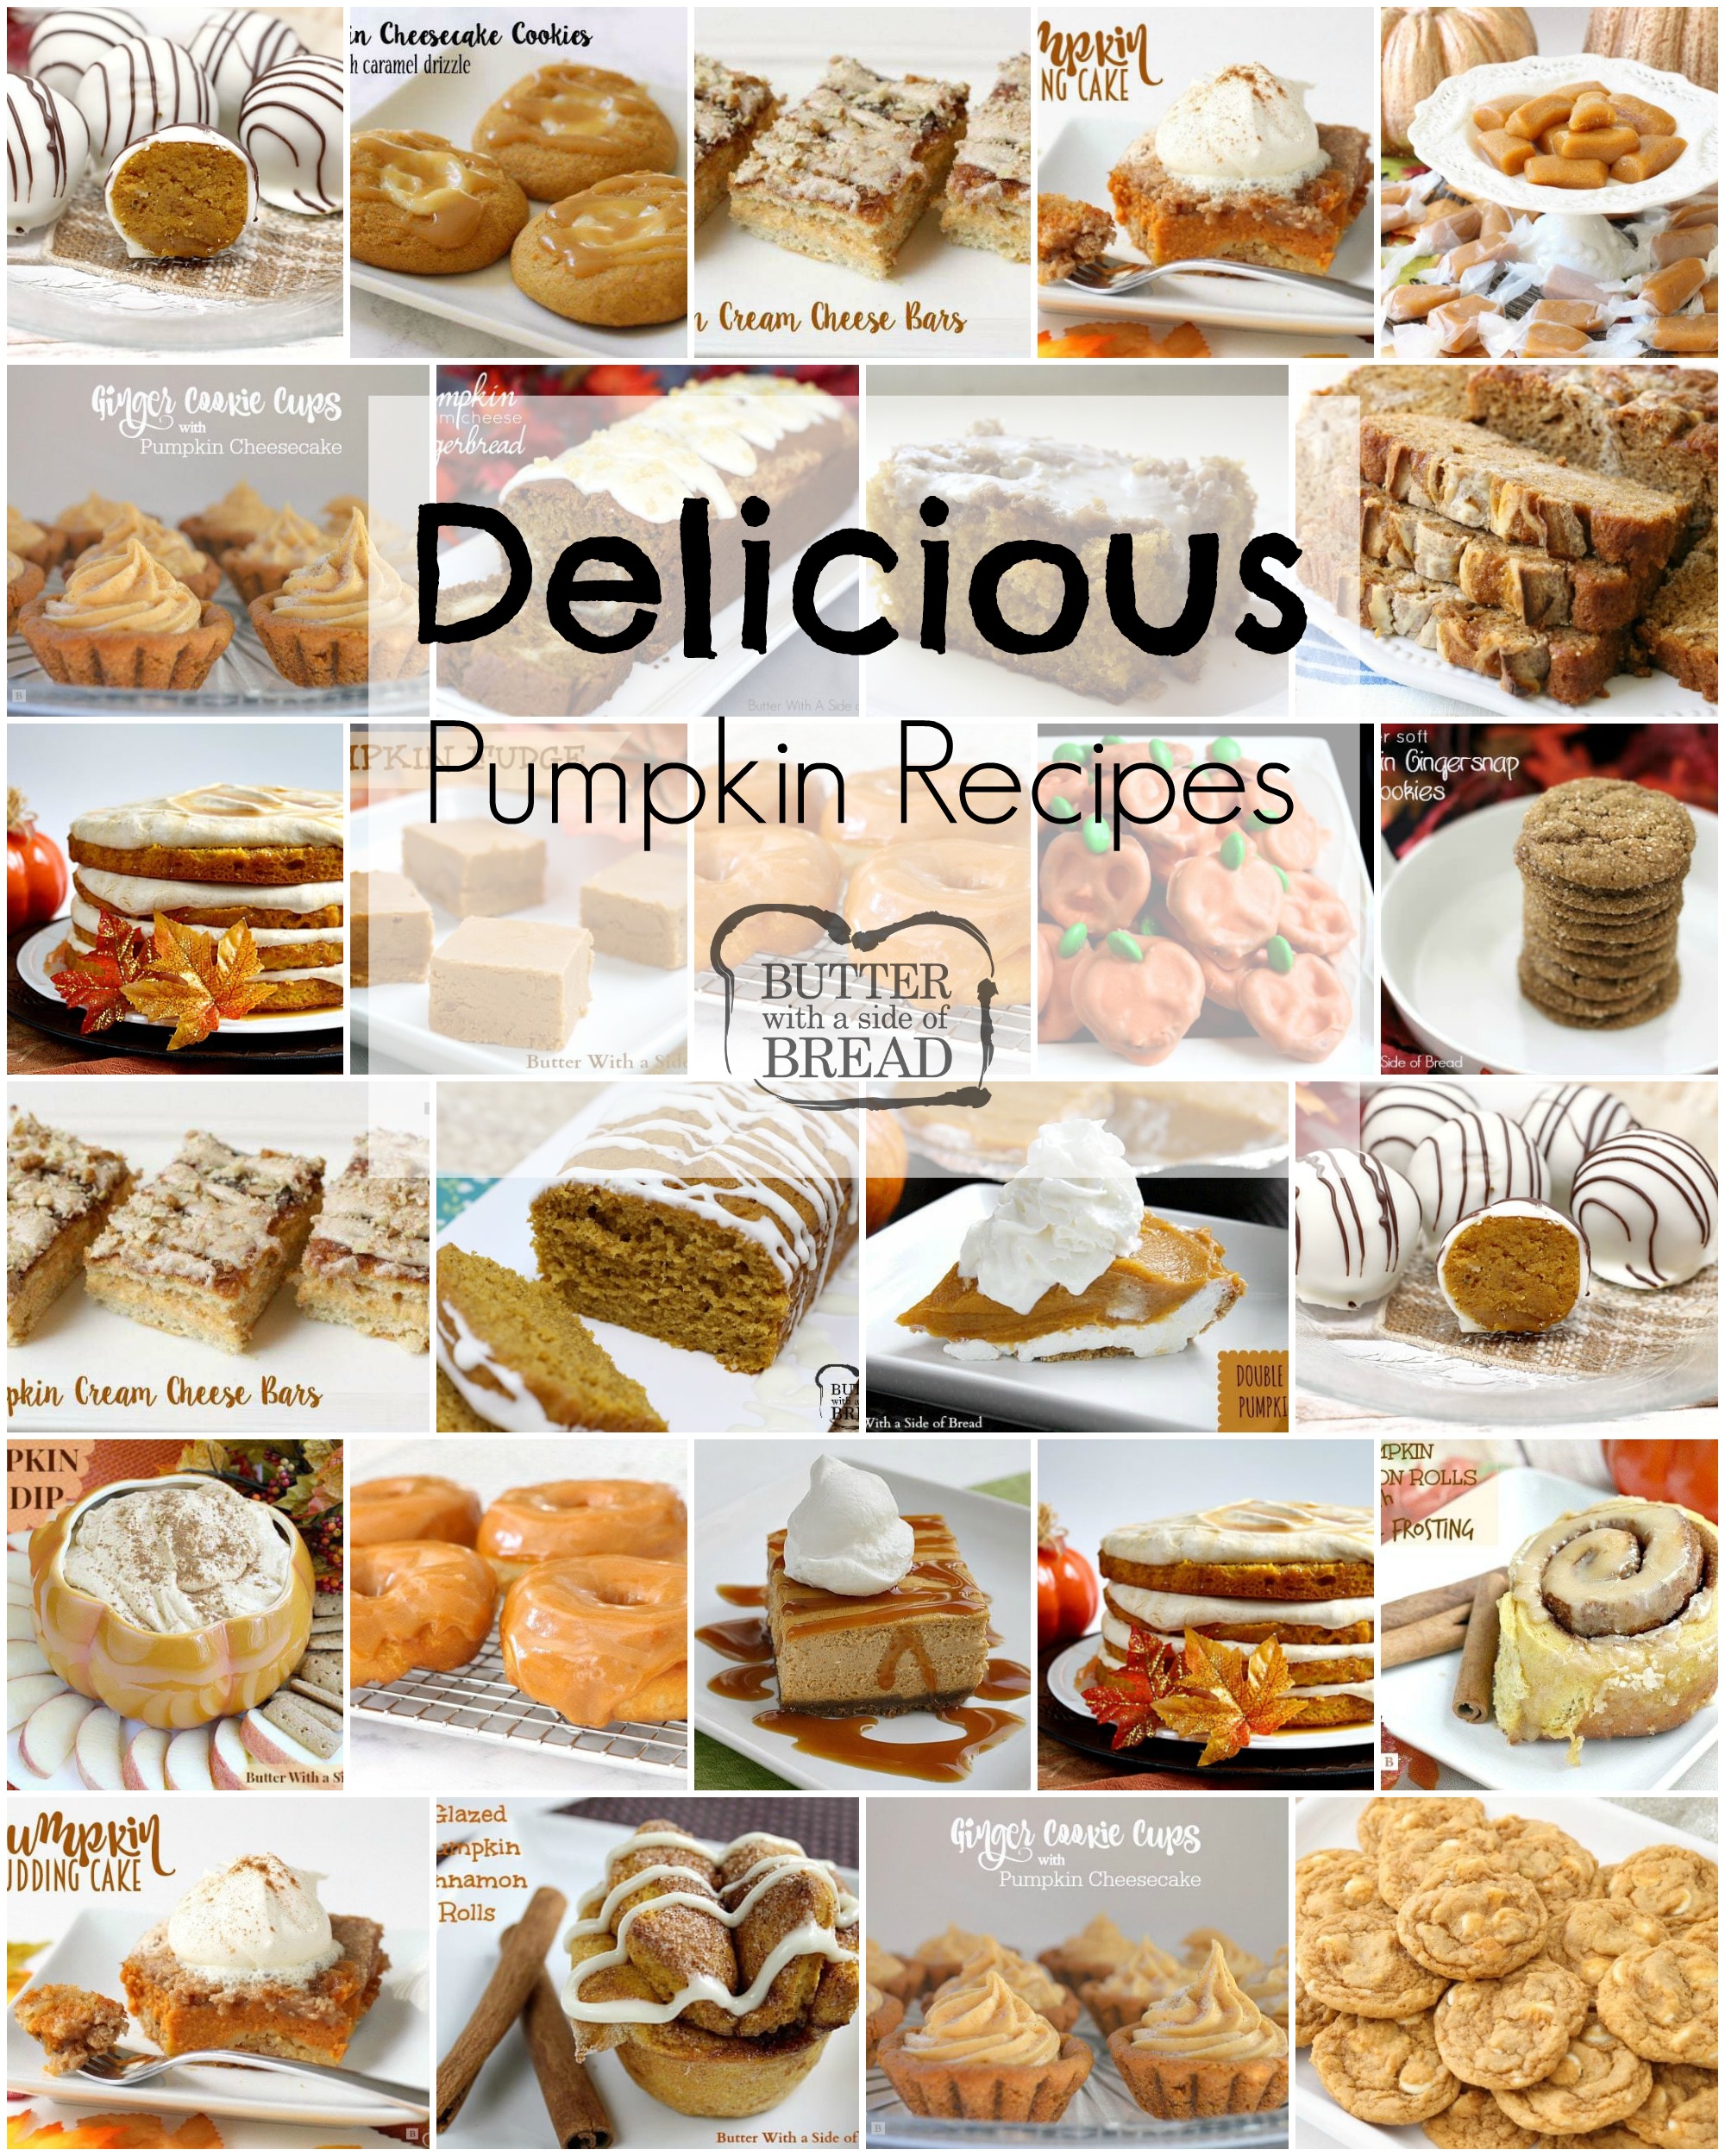 Delicious Pumpkin Recipes perfect for Fall or any time of the year! Breads, cookies, candy cakes and more; everyone loves these tasty, festive pumpkin recipes. 